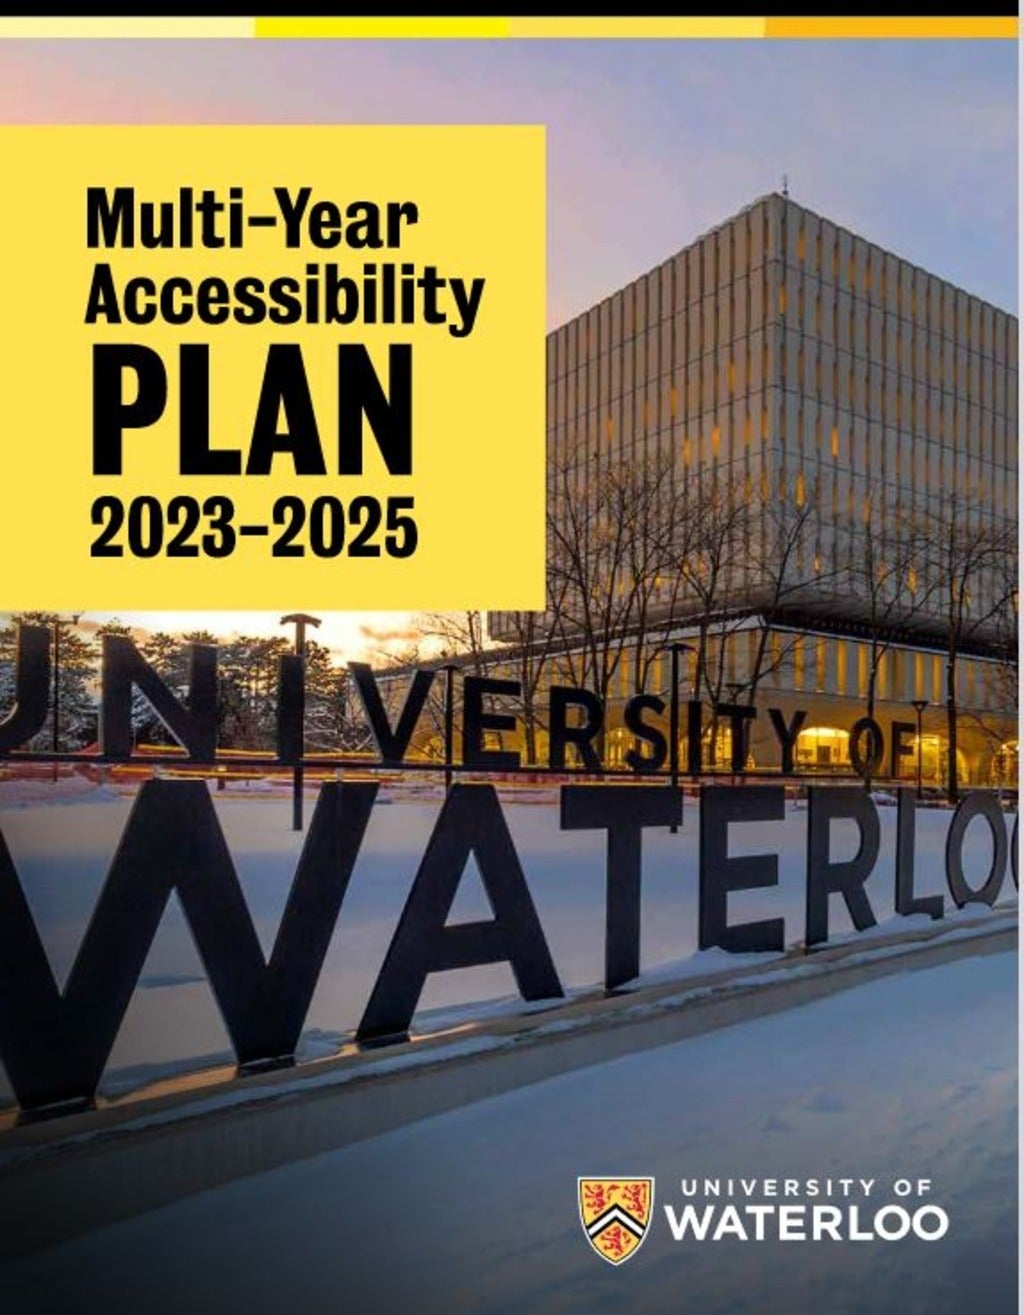 Cover of the Multi-Year Accessibiltiy Plan 2023-2025